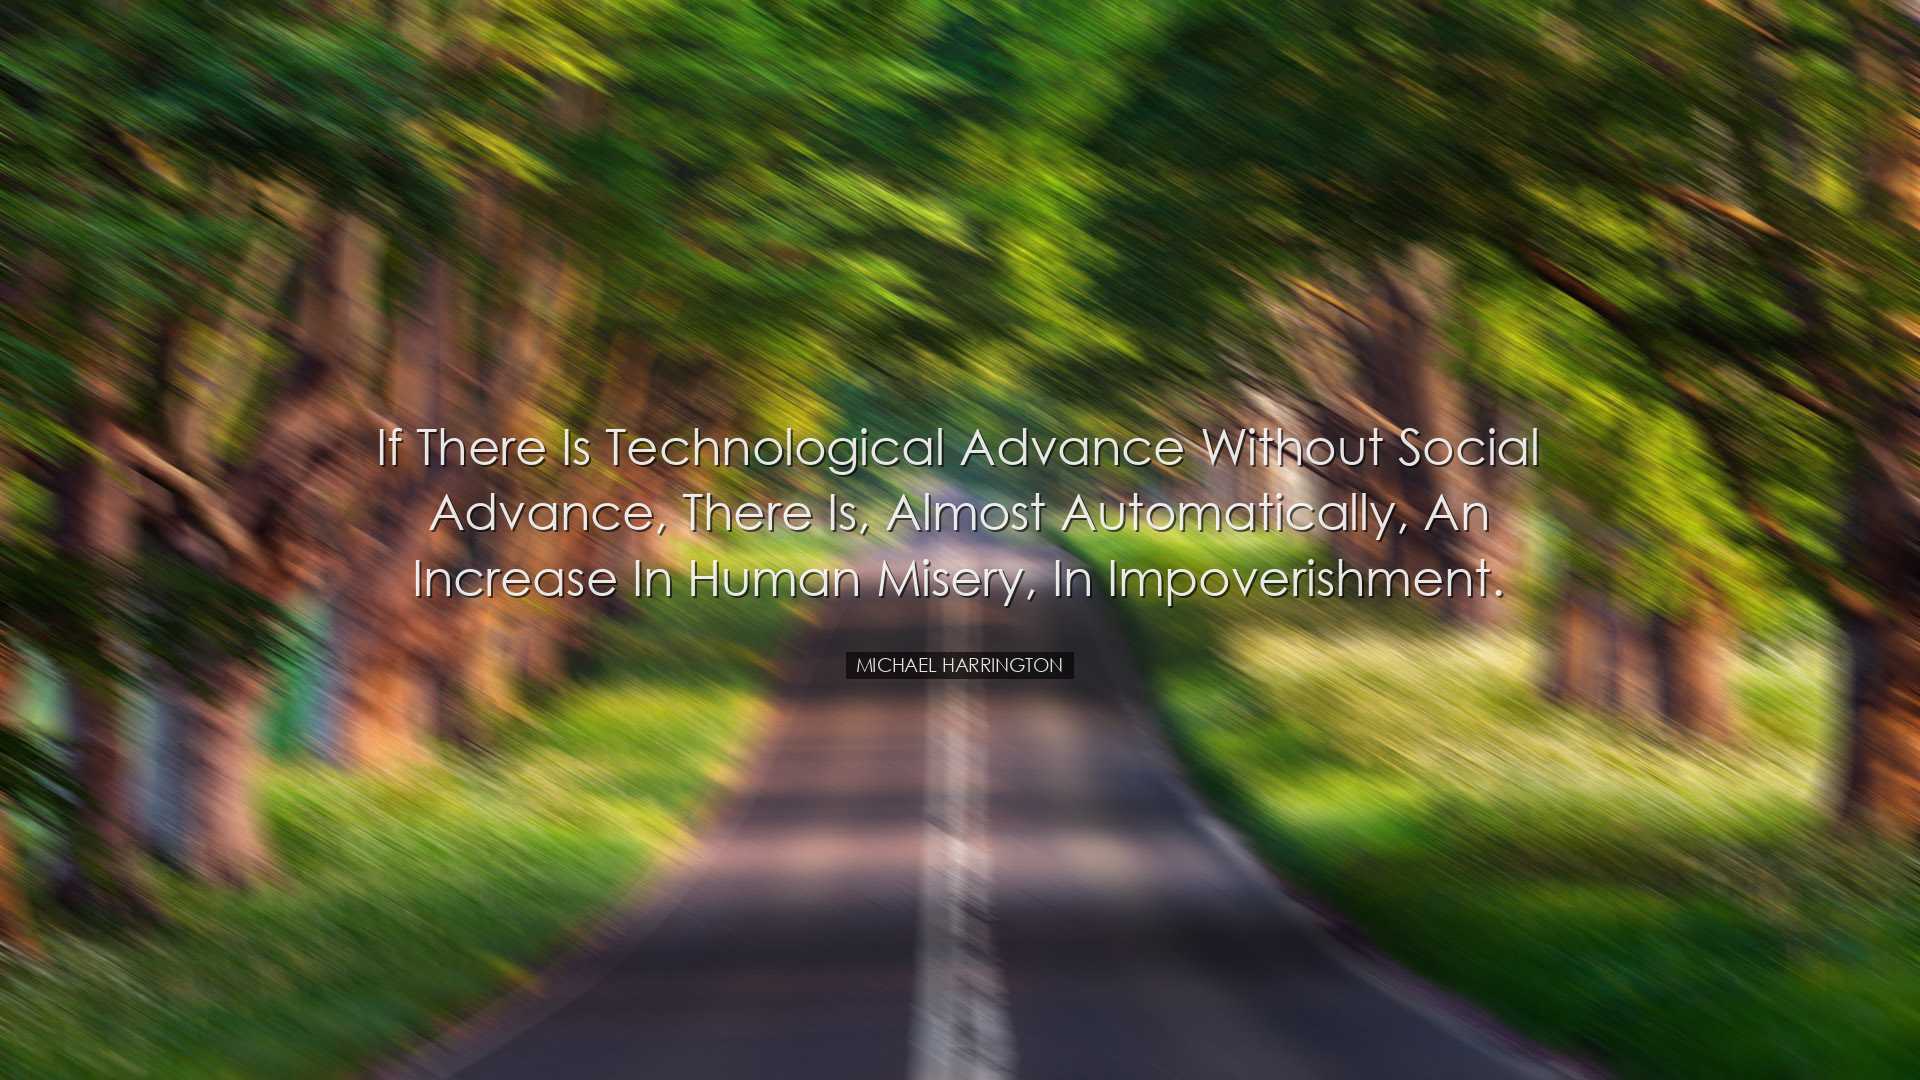 If there is technological advance without social advance, there is